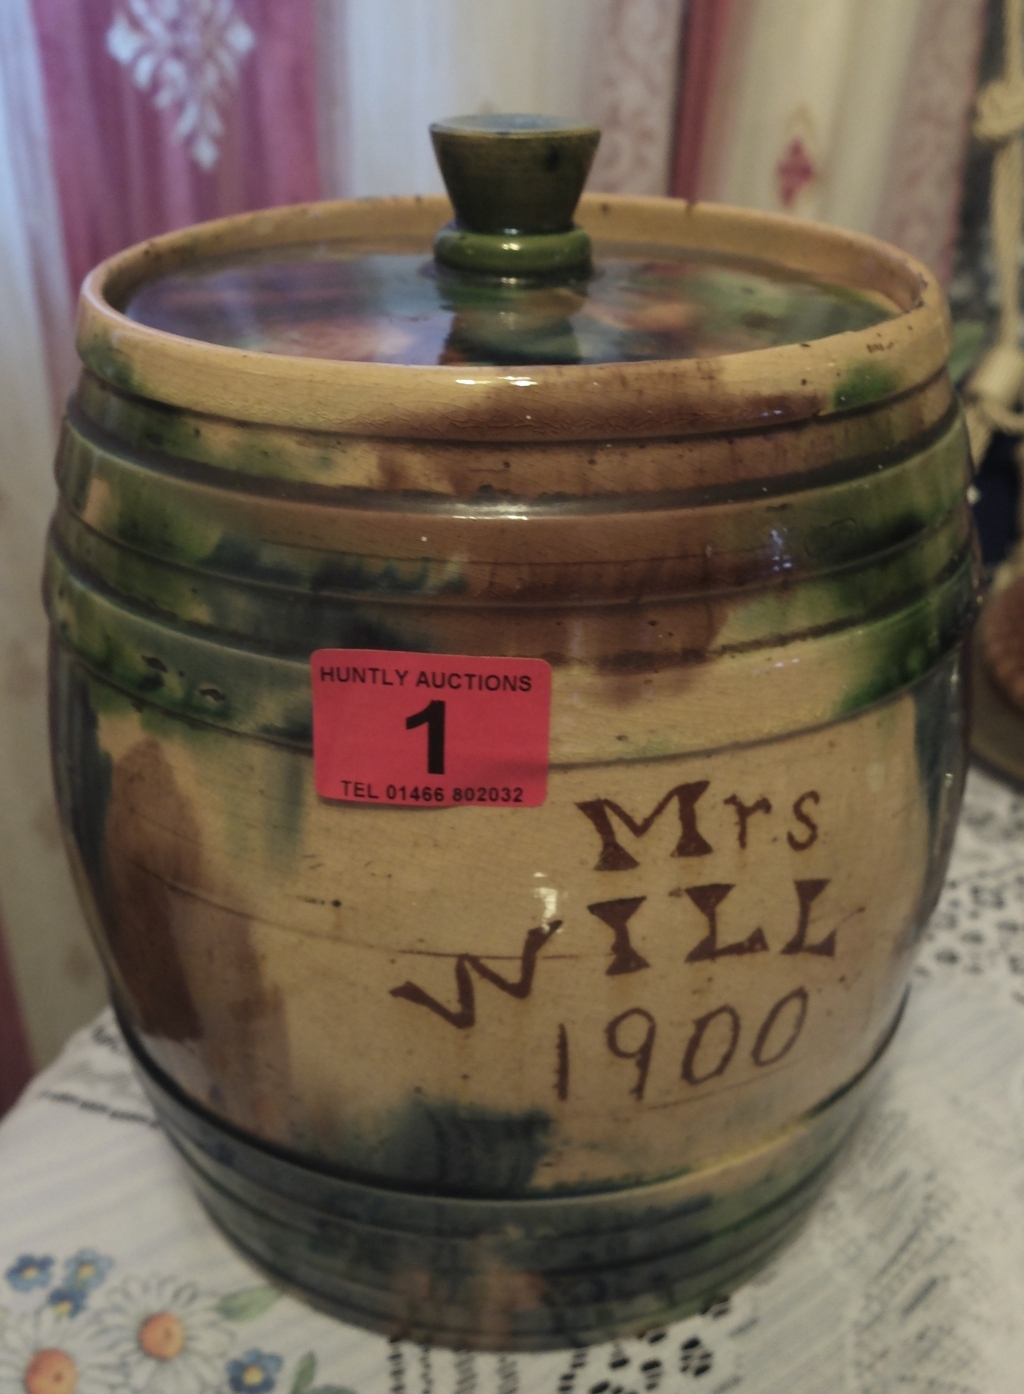 Antique Seaton Barrell with Lid - Mrs Will 1900 - 9 1/2" tall.